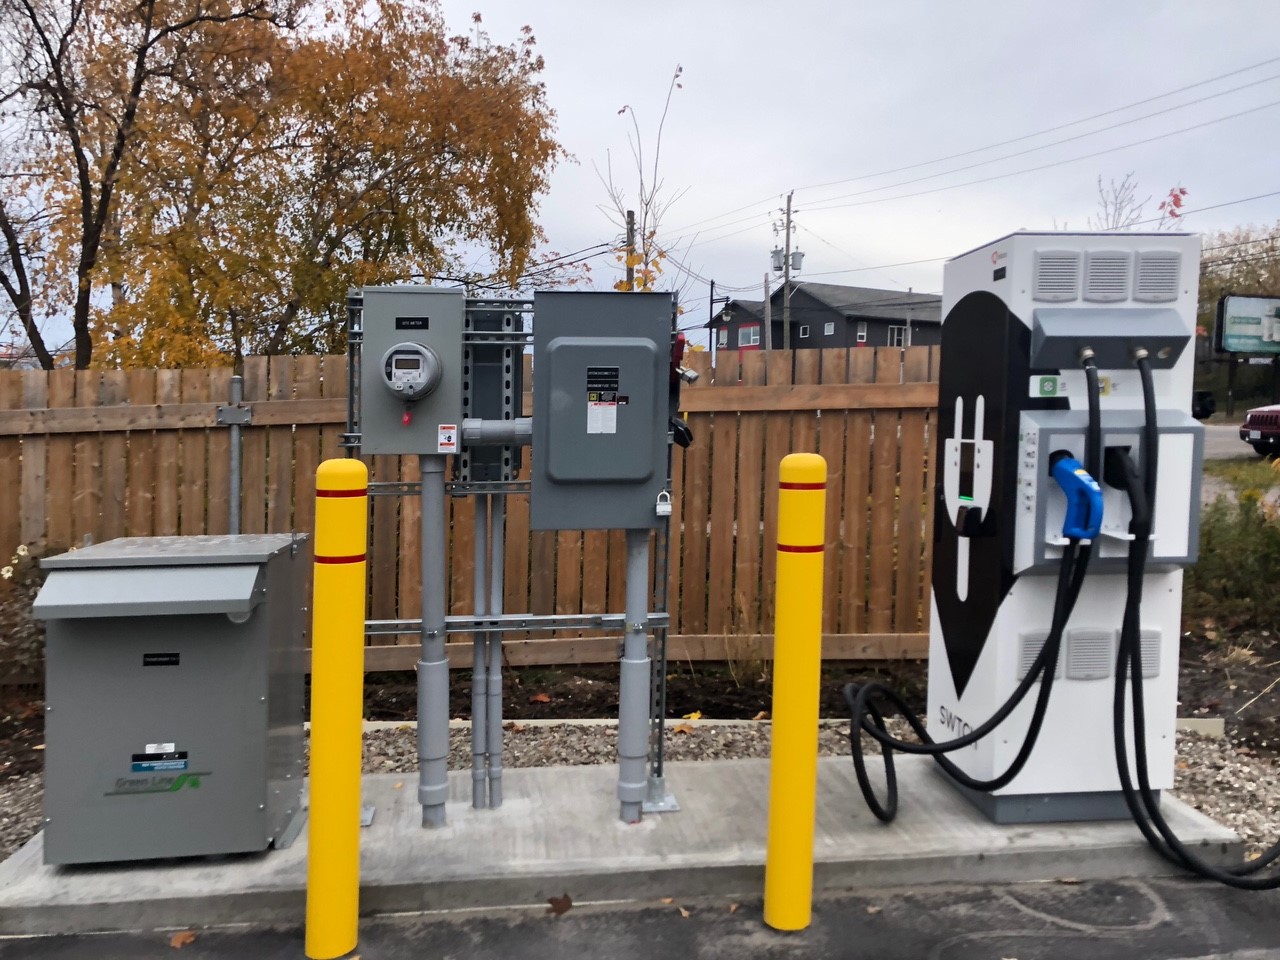 An electric vehicle charger, situated in a parking lot in front of a fence.